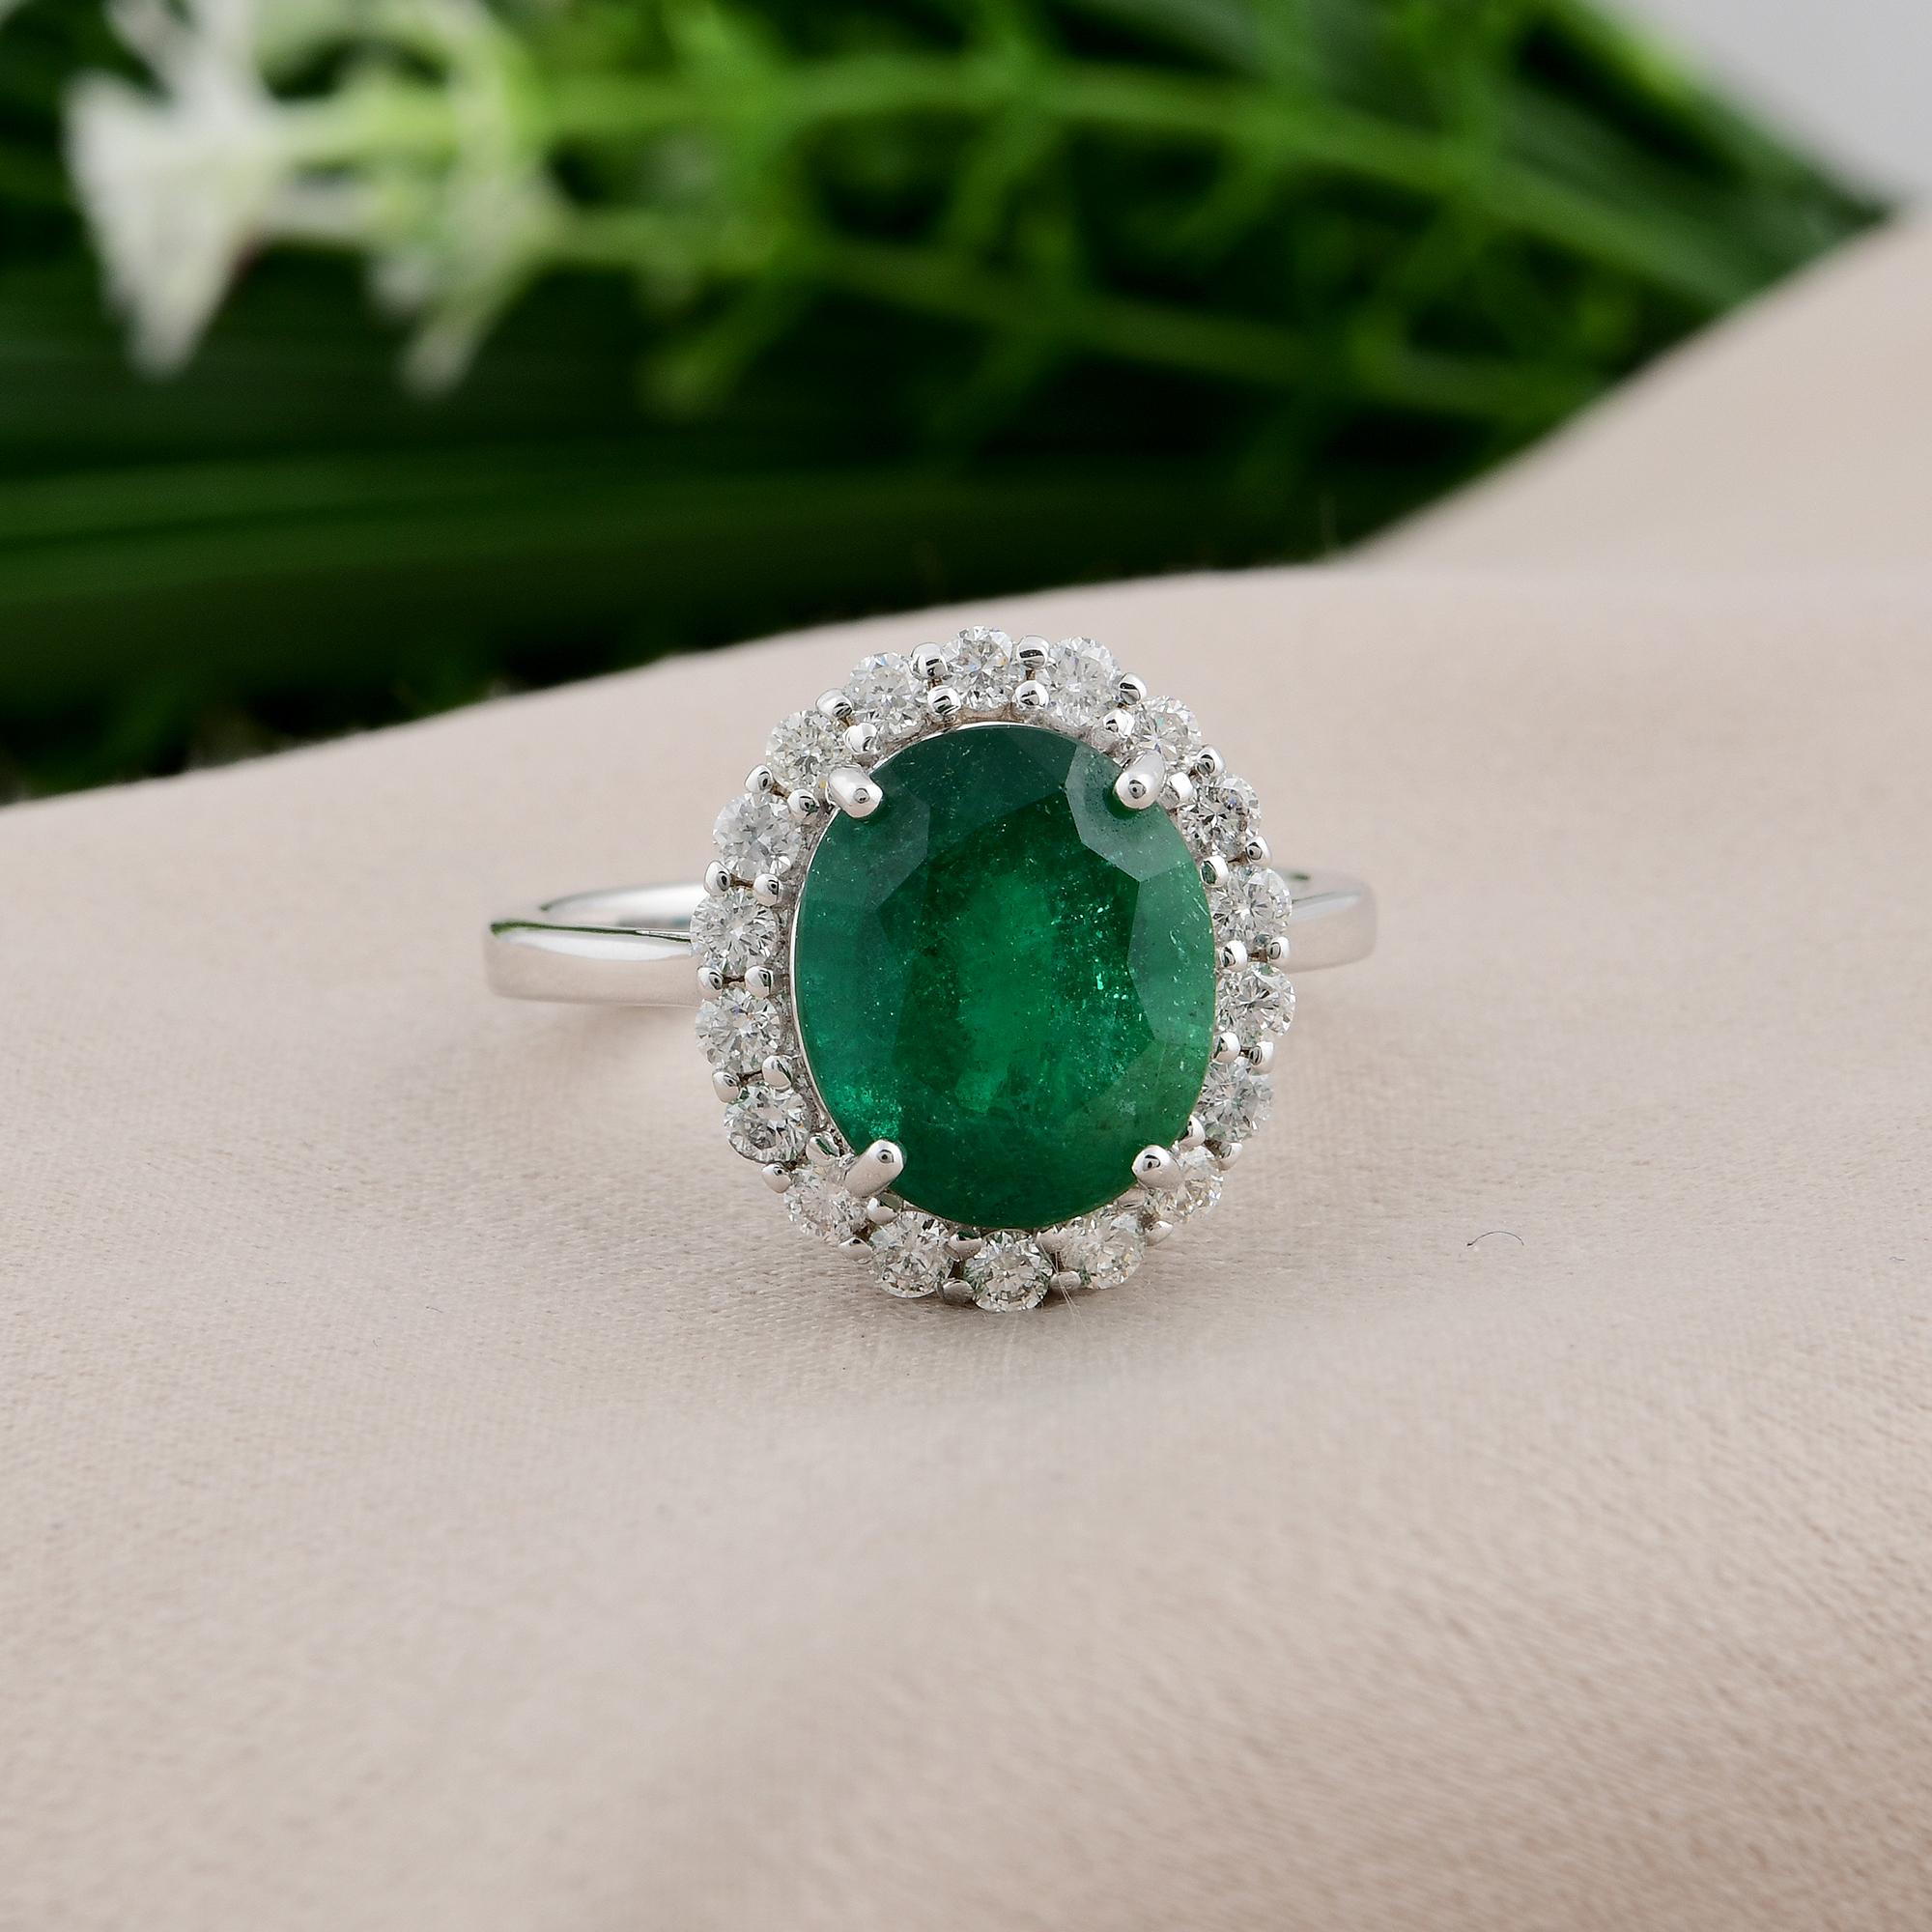 Oval Cut Oval Natural Emerald Gemstone Cocktail Ring Diamond 14 Karat White Gold Jewelry For Sale